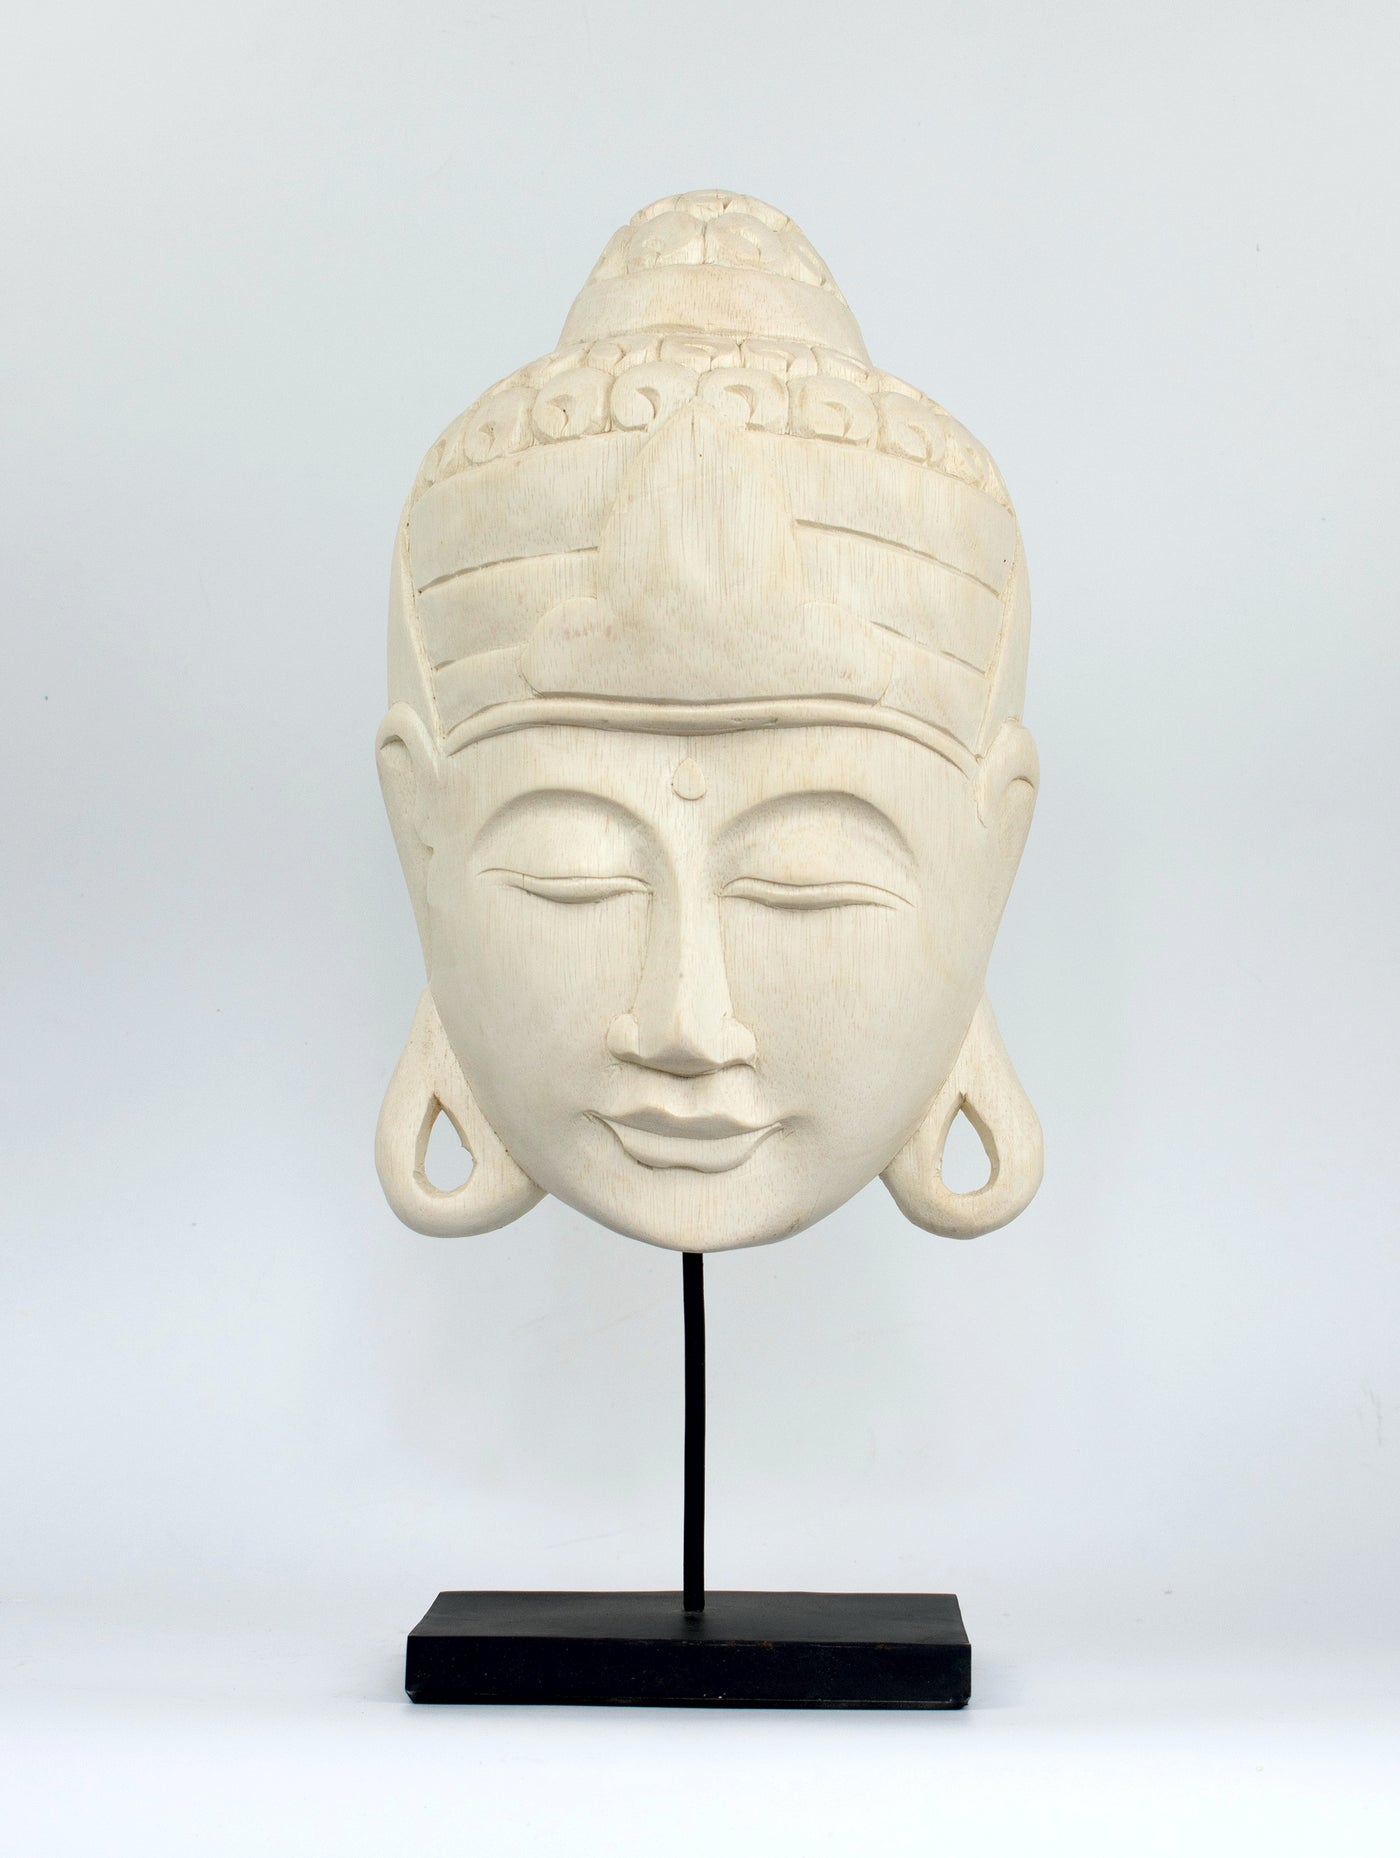 17" Wooden White Buddha Head Mask with Stand Statue Hand Carved Sculpture Handmade Figurine